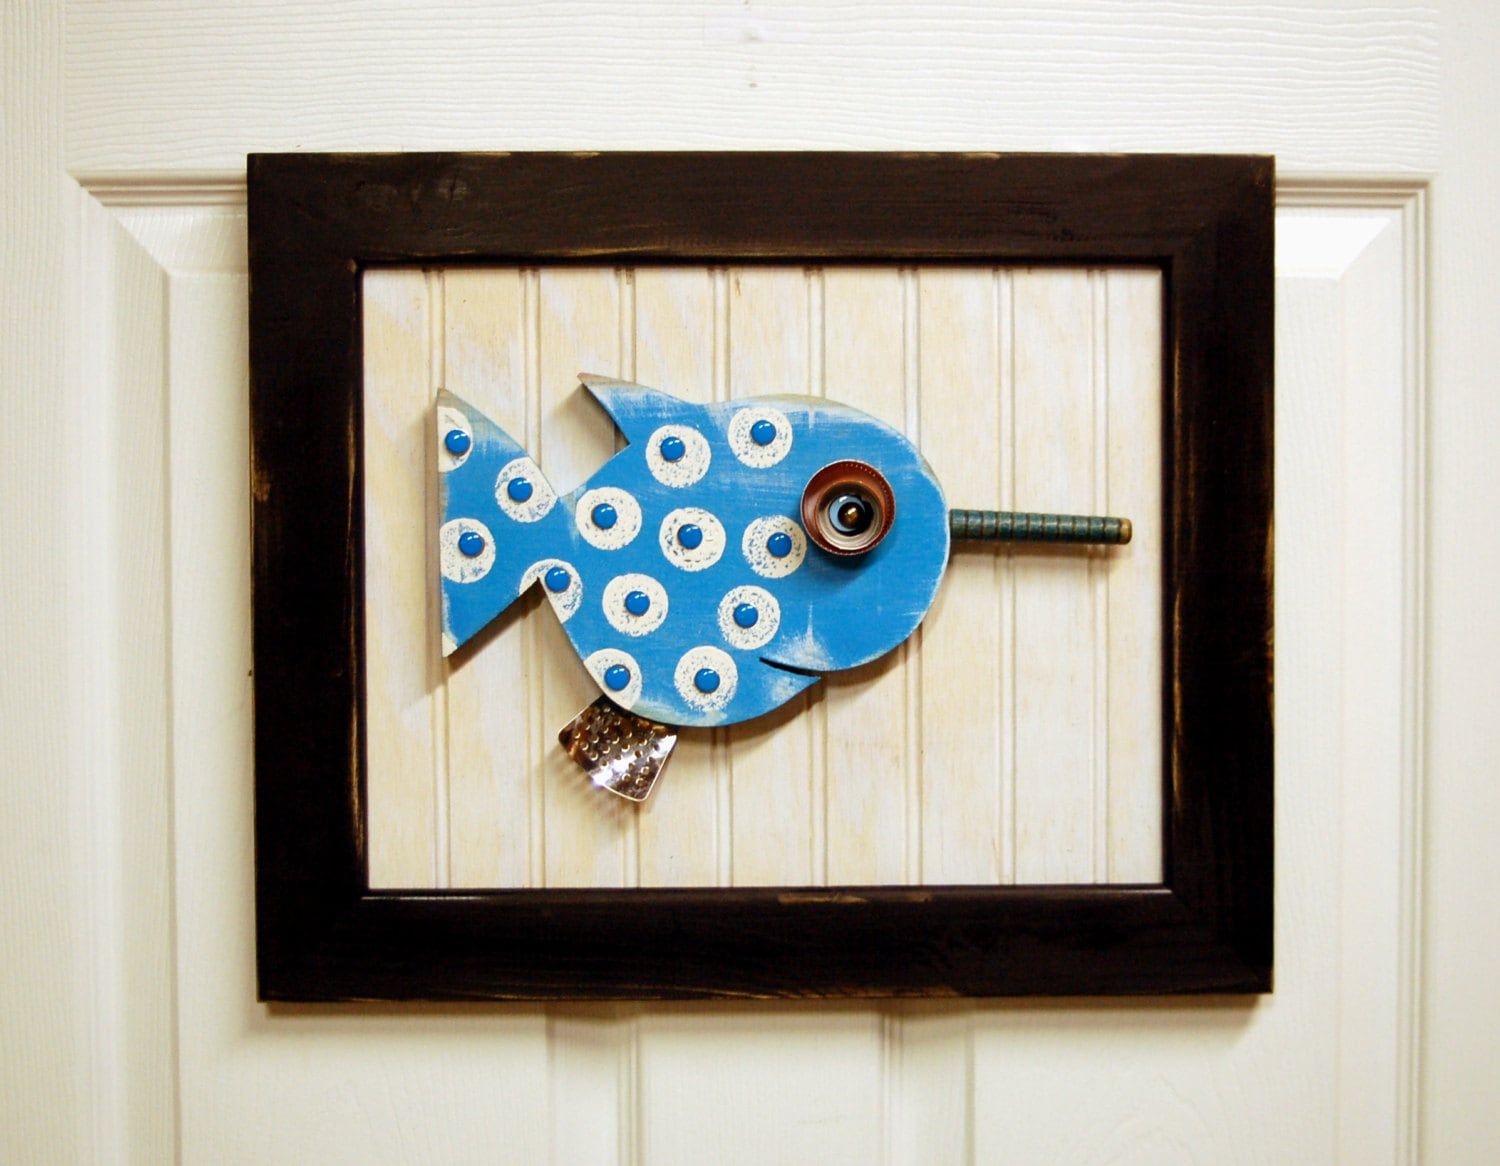 Fish Wall Art 3 Dimensional Framed Recycled Narhwal Fish Oak Pertaining To Newest 3 Dimensional Wall Art (View 5 of 20)